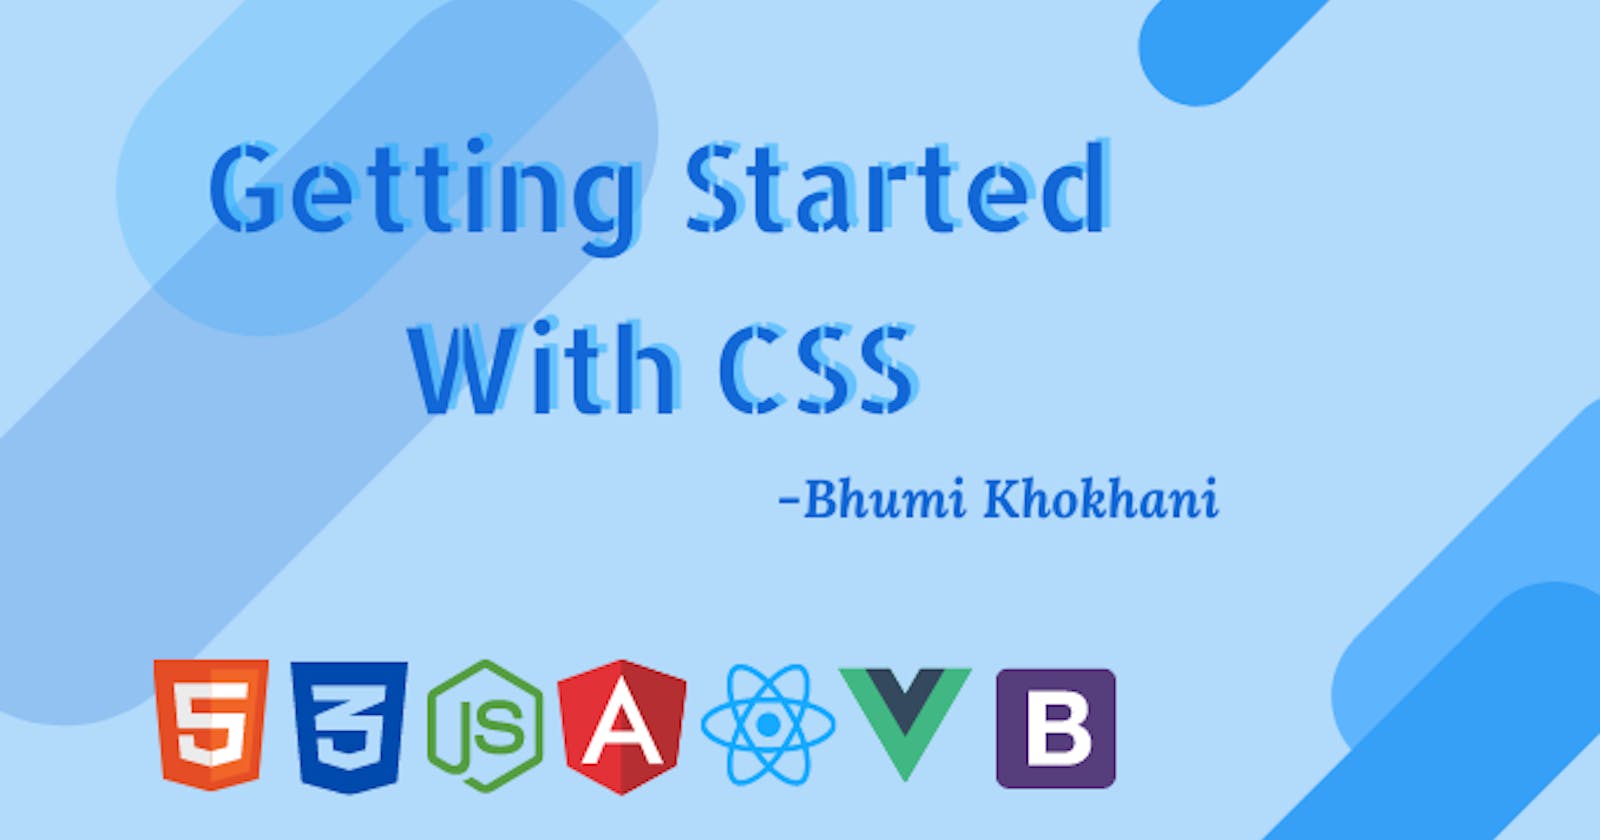 Getting started with CSS